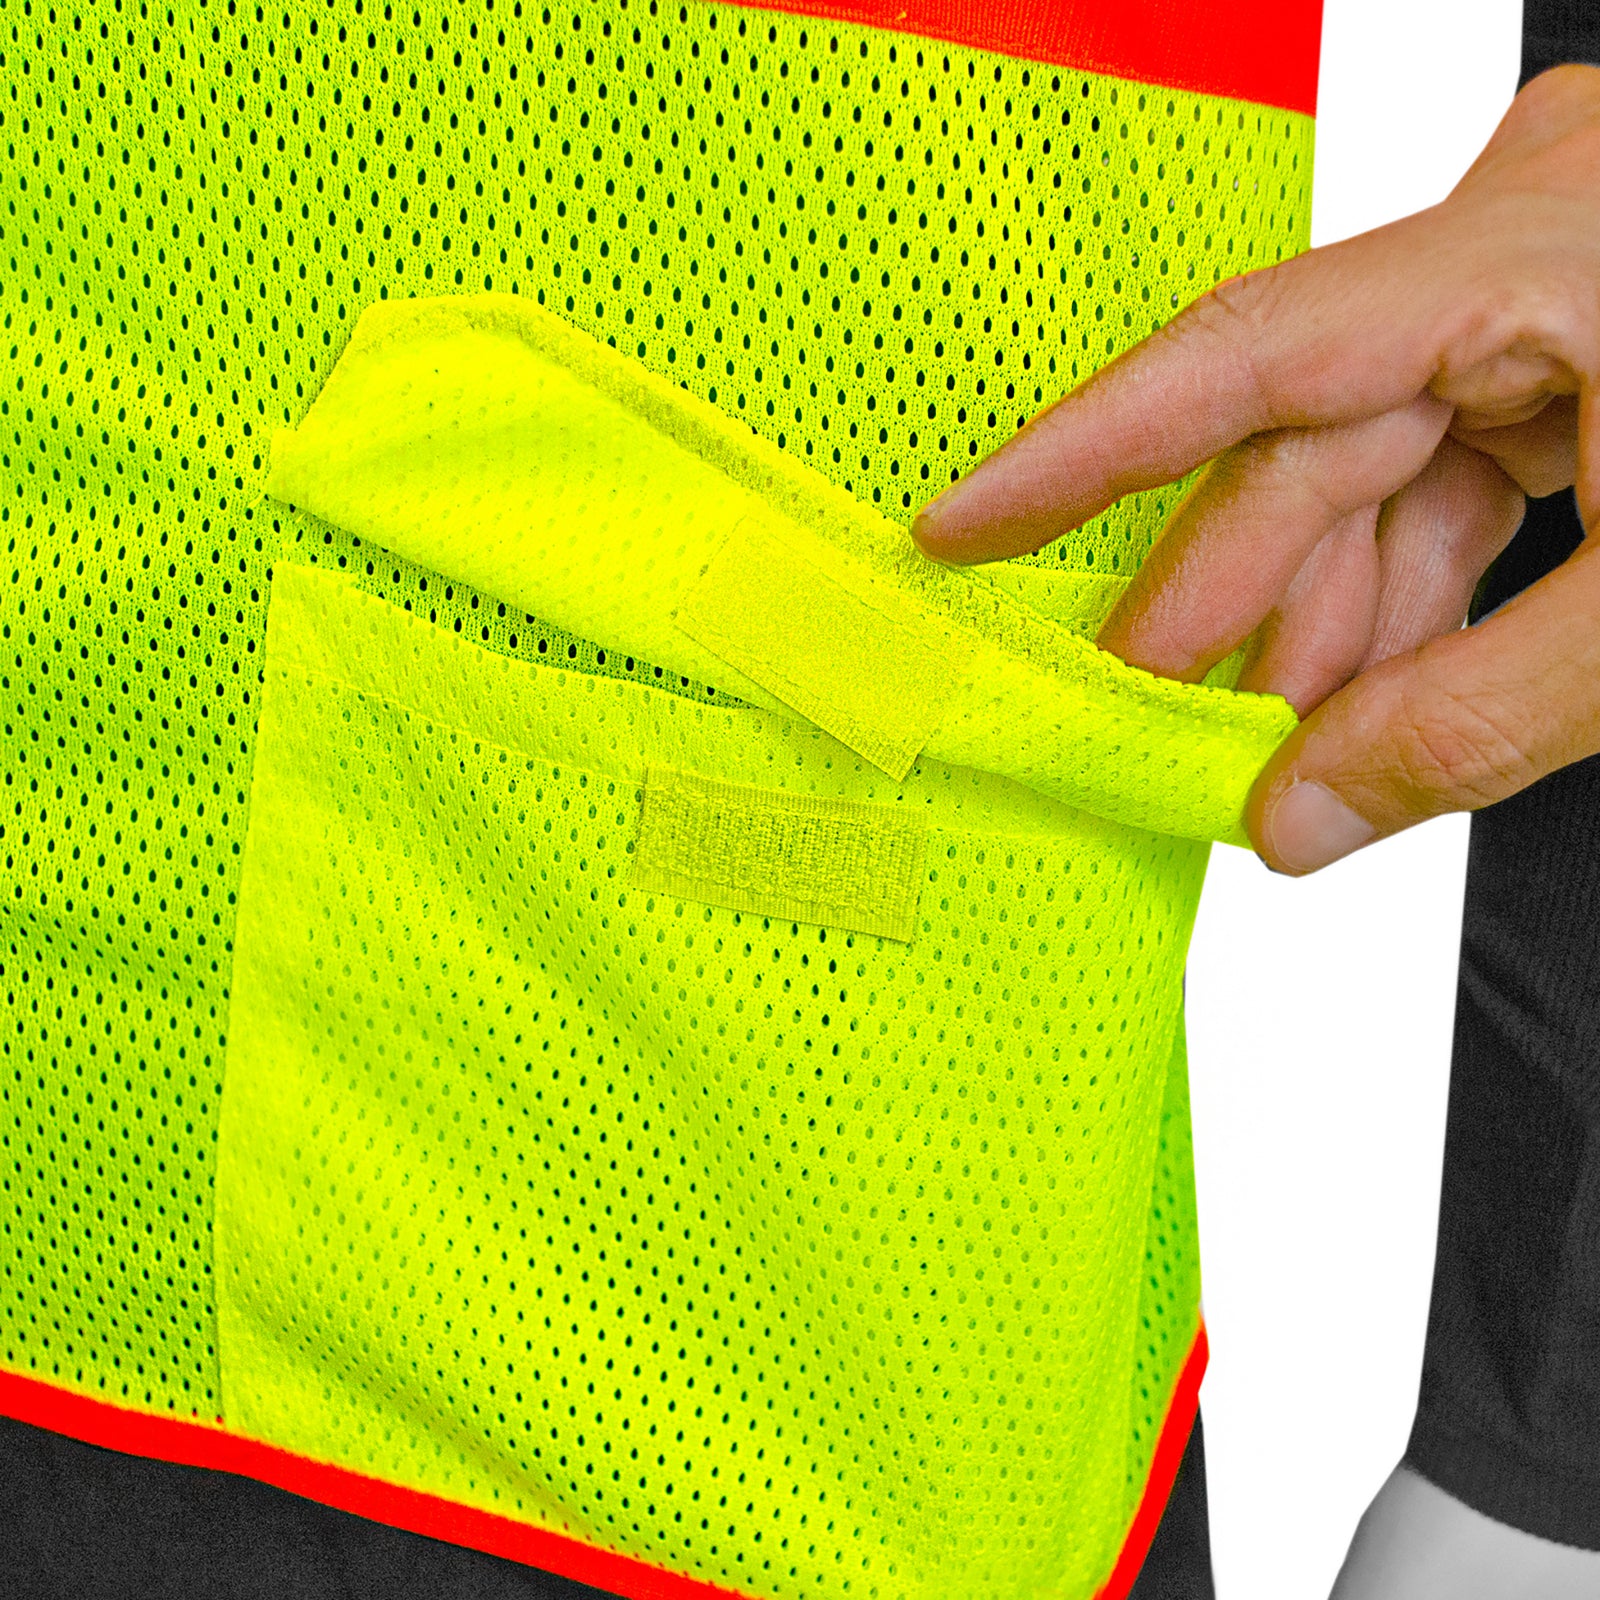 Close up of the pocket with hook and loop flap closure of the reflective safety vest